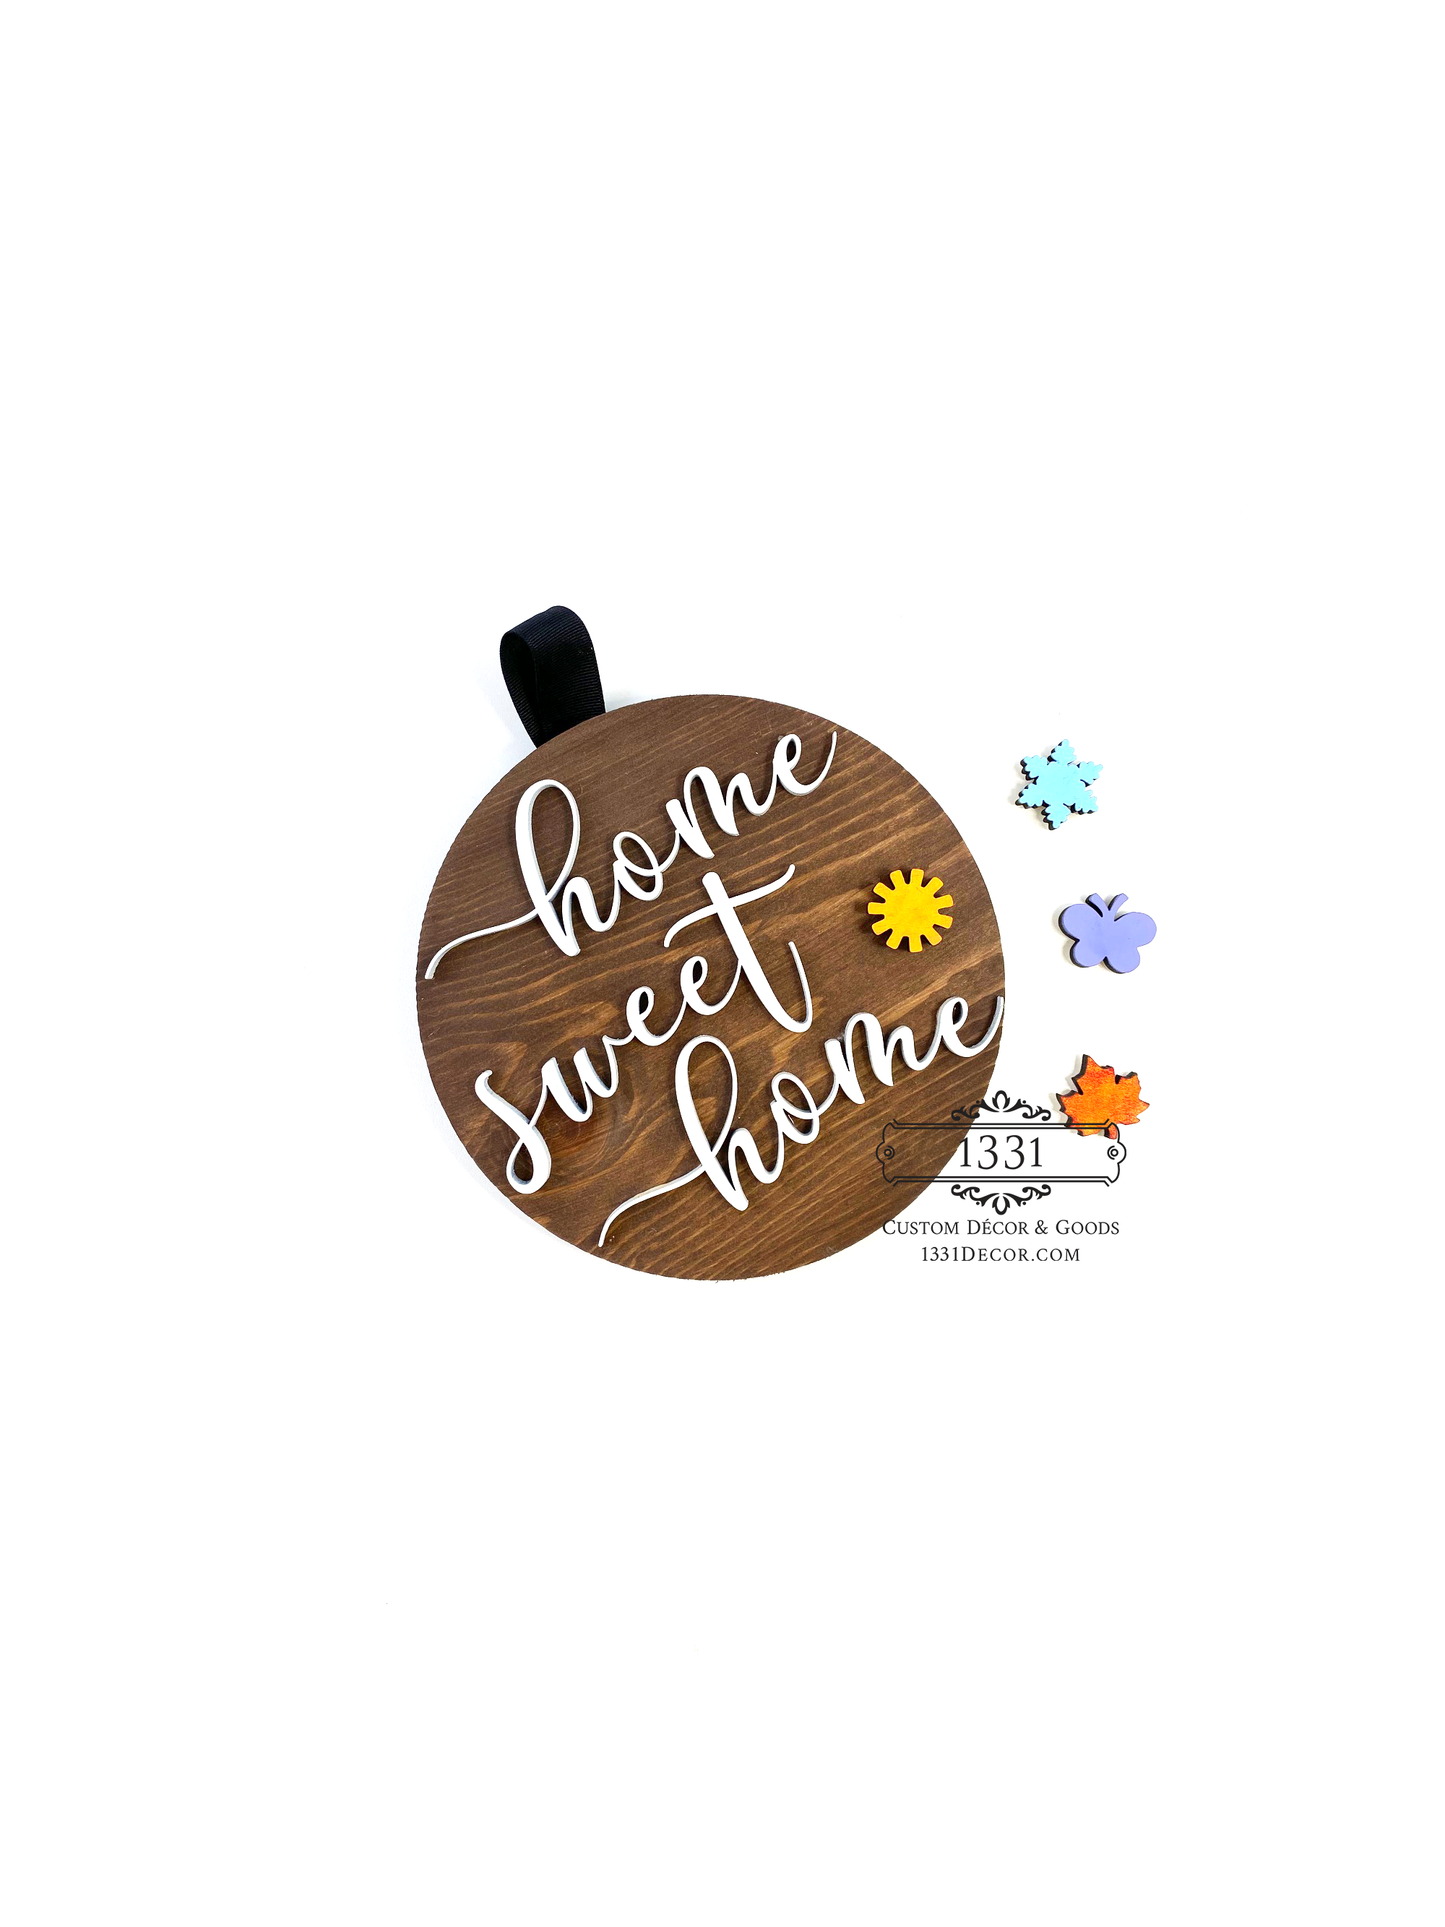 Home Sweet Home Interchangeable Round Sign, Seasonal Interchangeable Sign, Home Sweet Home Sign, Housewarming Sign, Interchangeable Sign, Seasonal Sign, Holiday Sign, Seasonal Decor, Holiday Decor